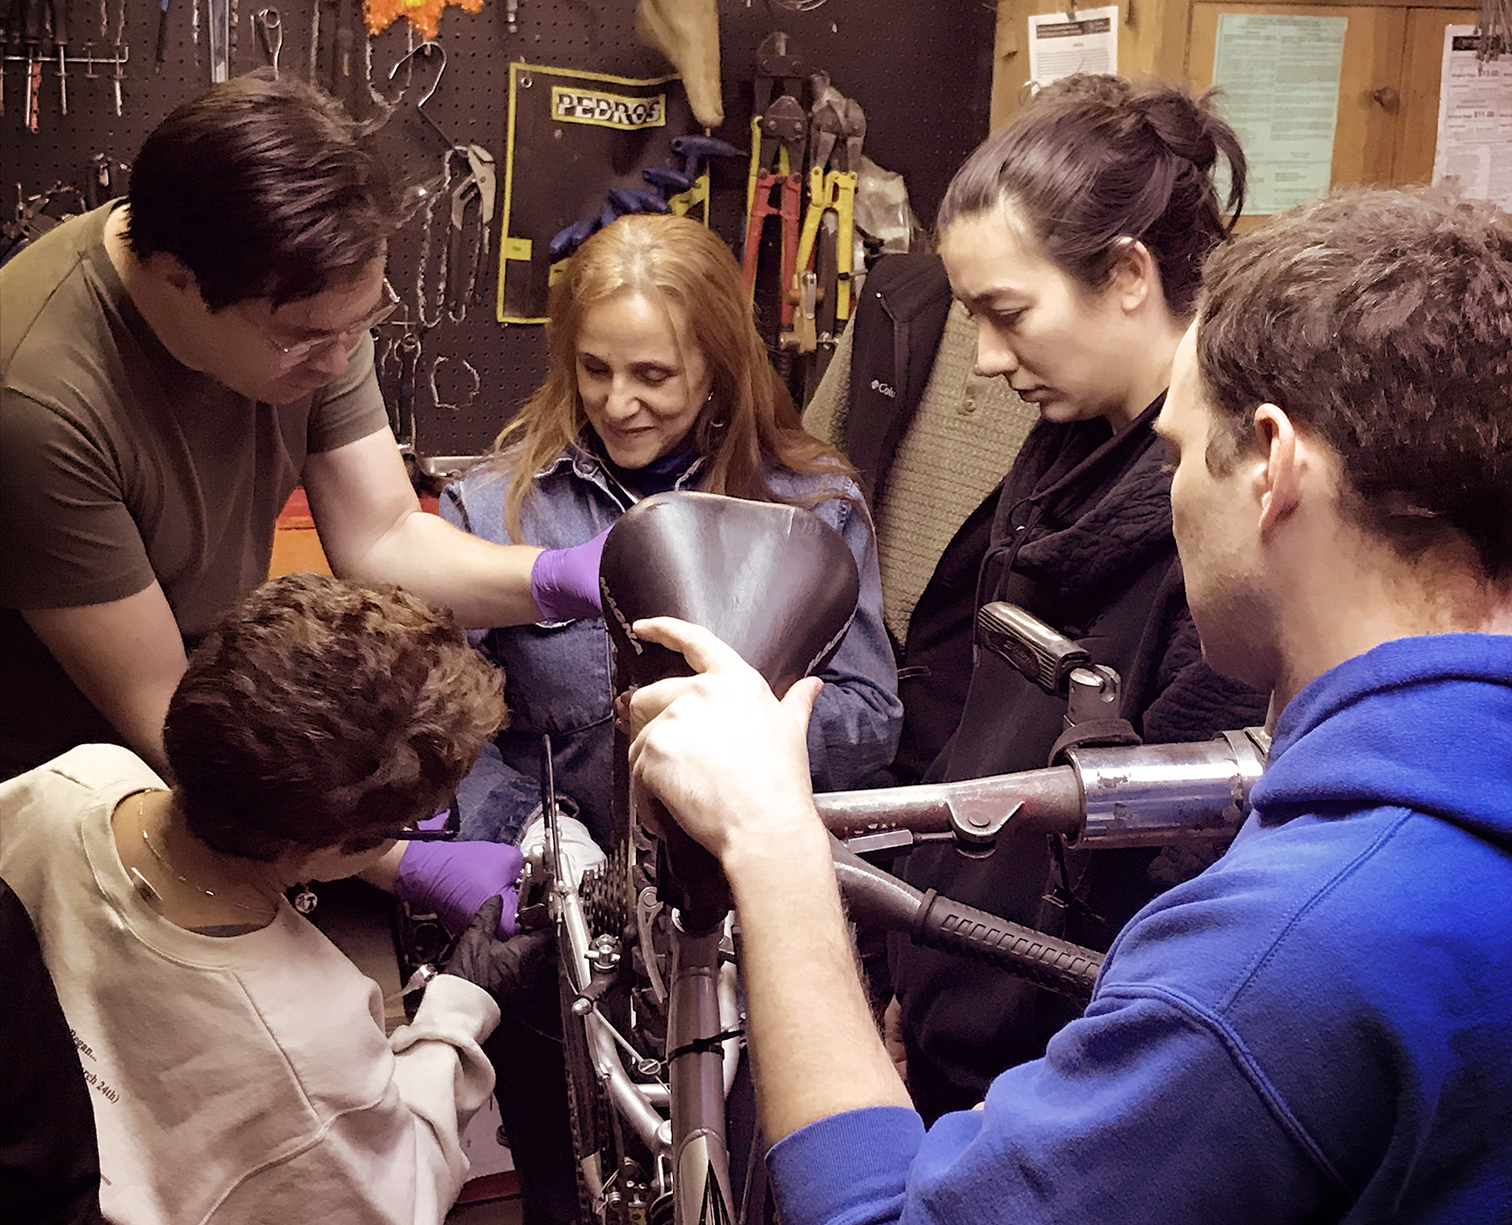 IMAGE DESCRIPTION: Two men and three women stand around the rear wheel of a bicycle, inspecting the gear system. Two are wearing nitrile gloves. The group is surrounded by a variety of tools hung on the wall.